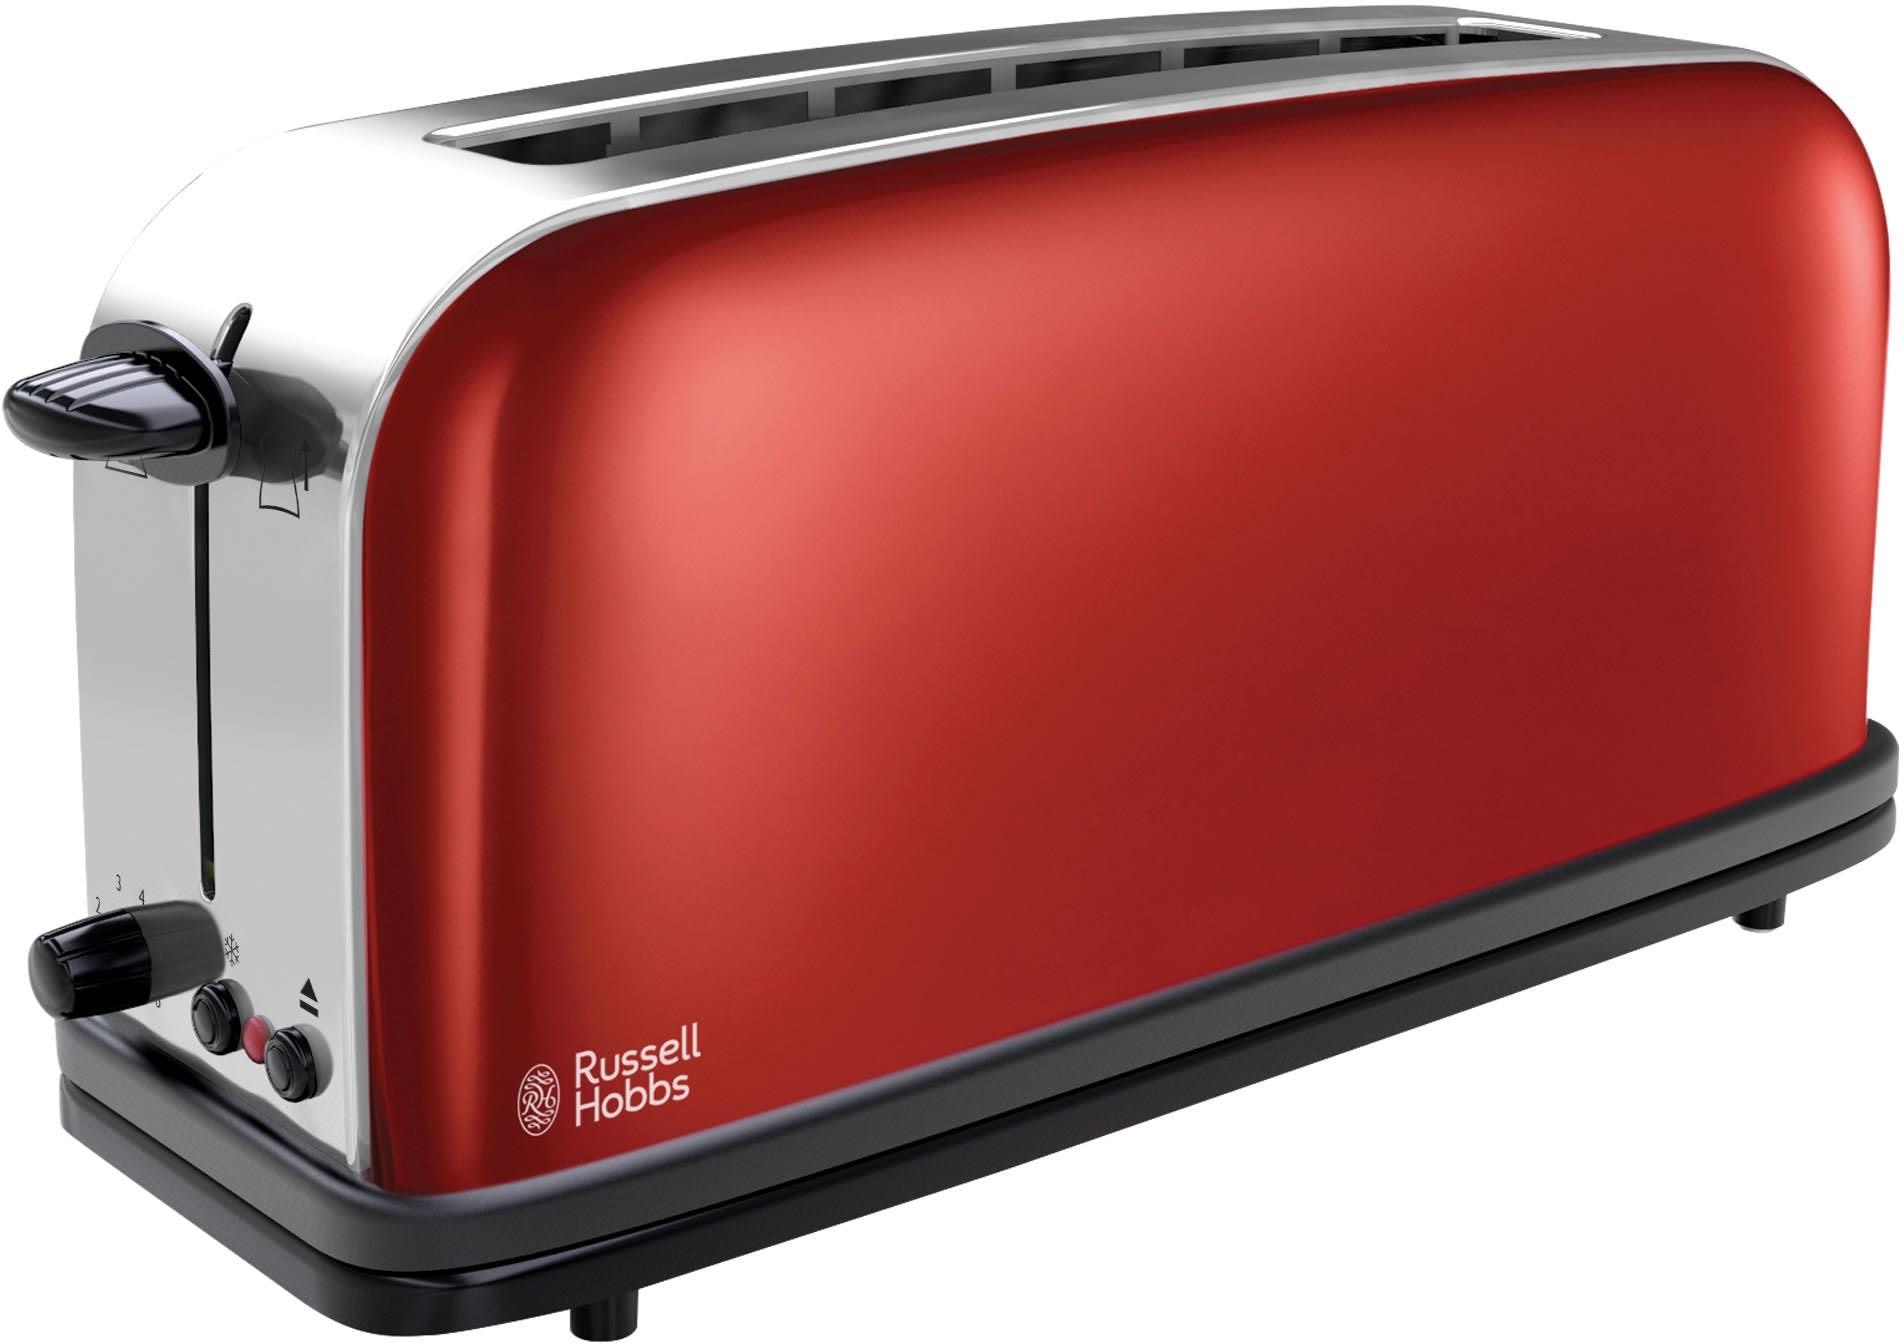 RUSSELL HOBBS Toaster »Colours Plus+ Flame Red 21391-56«, 1 langer Schlitz, 1000 W